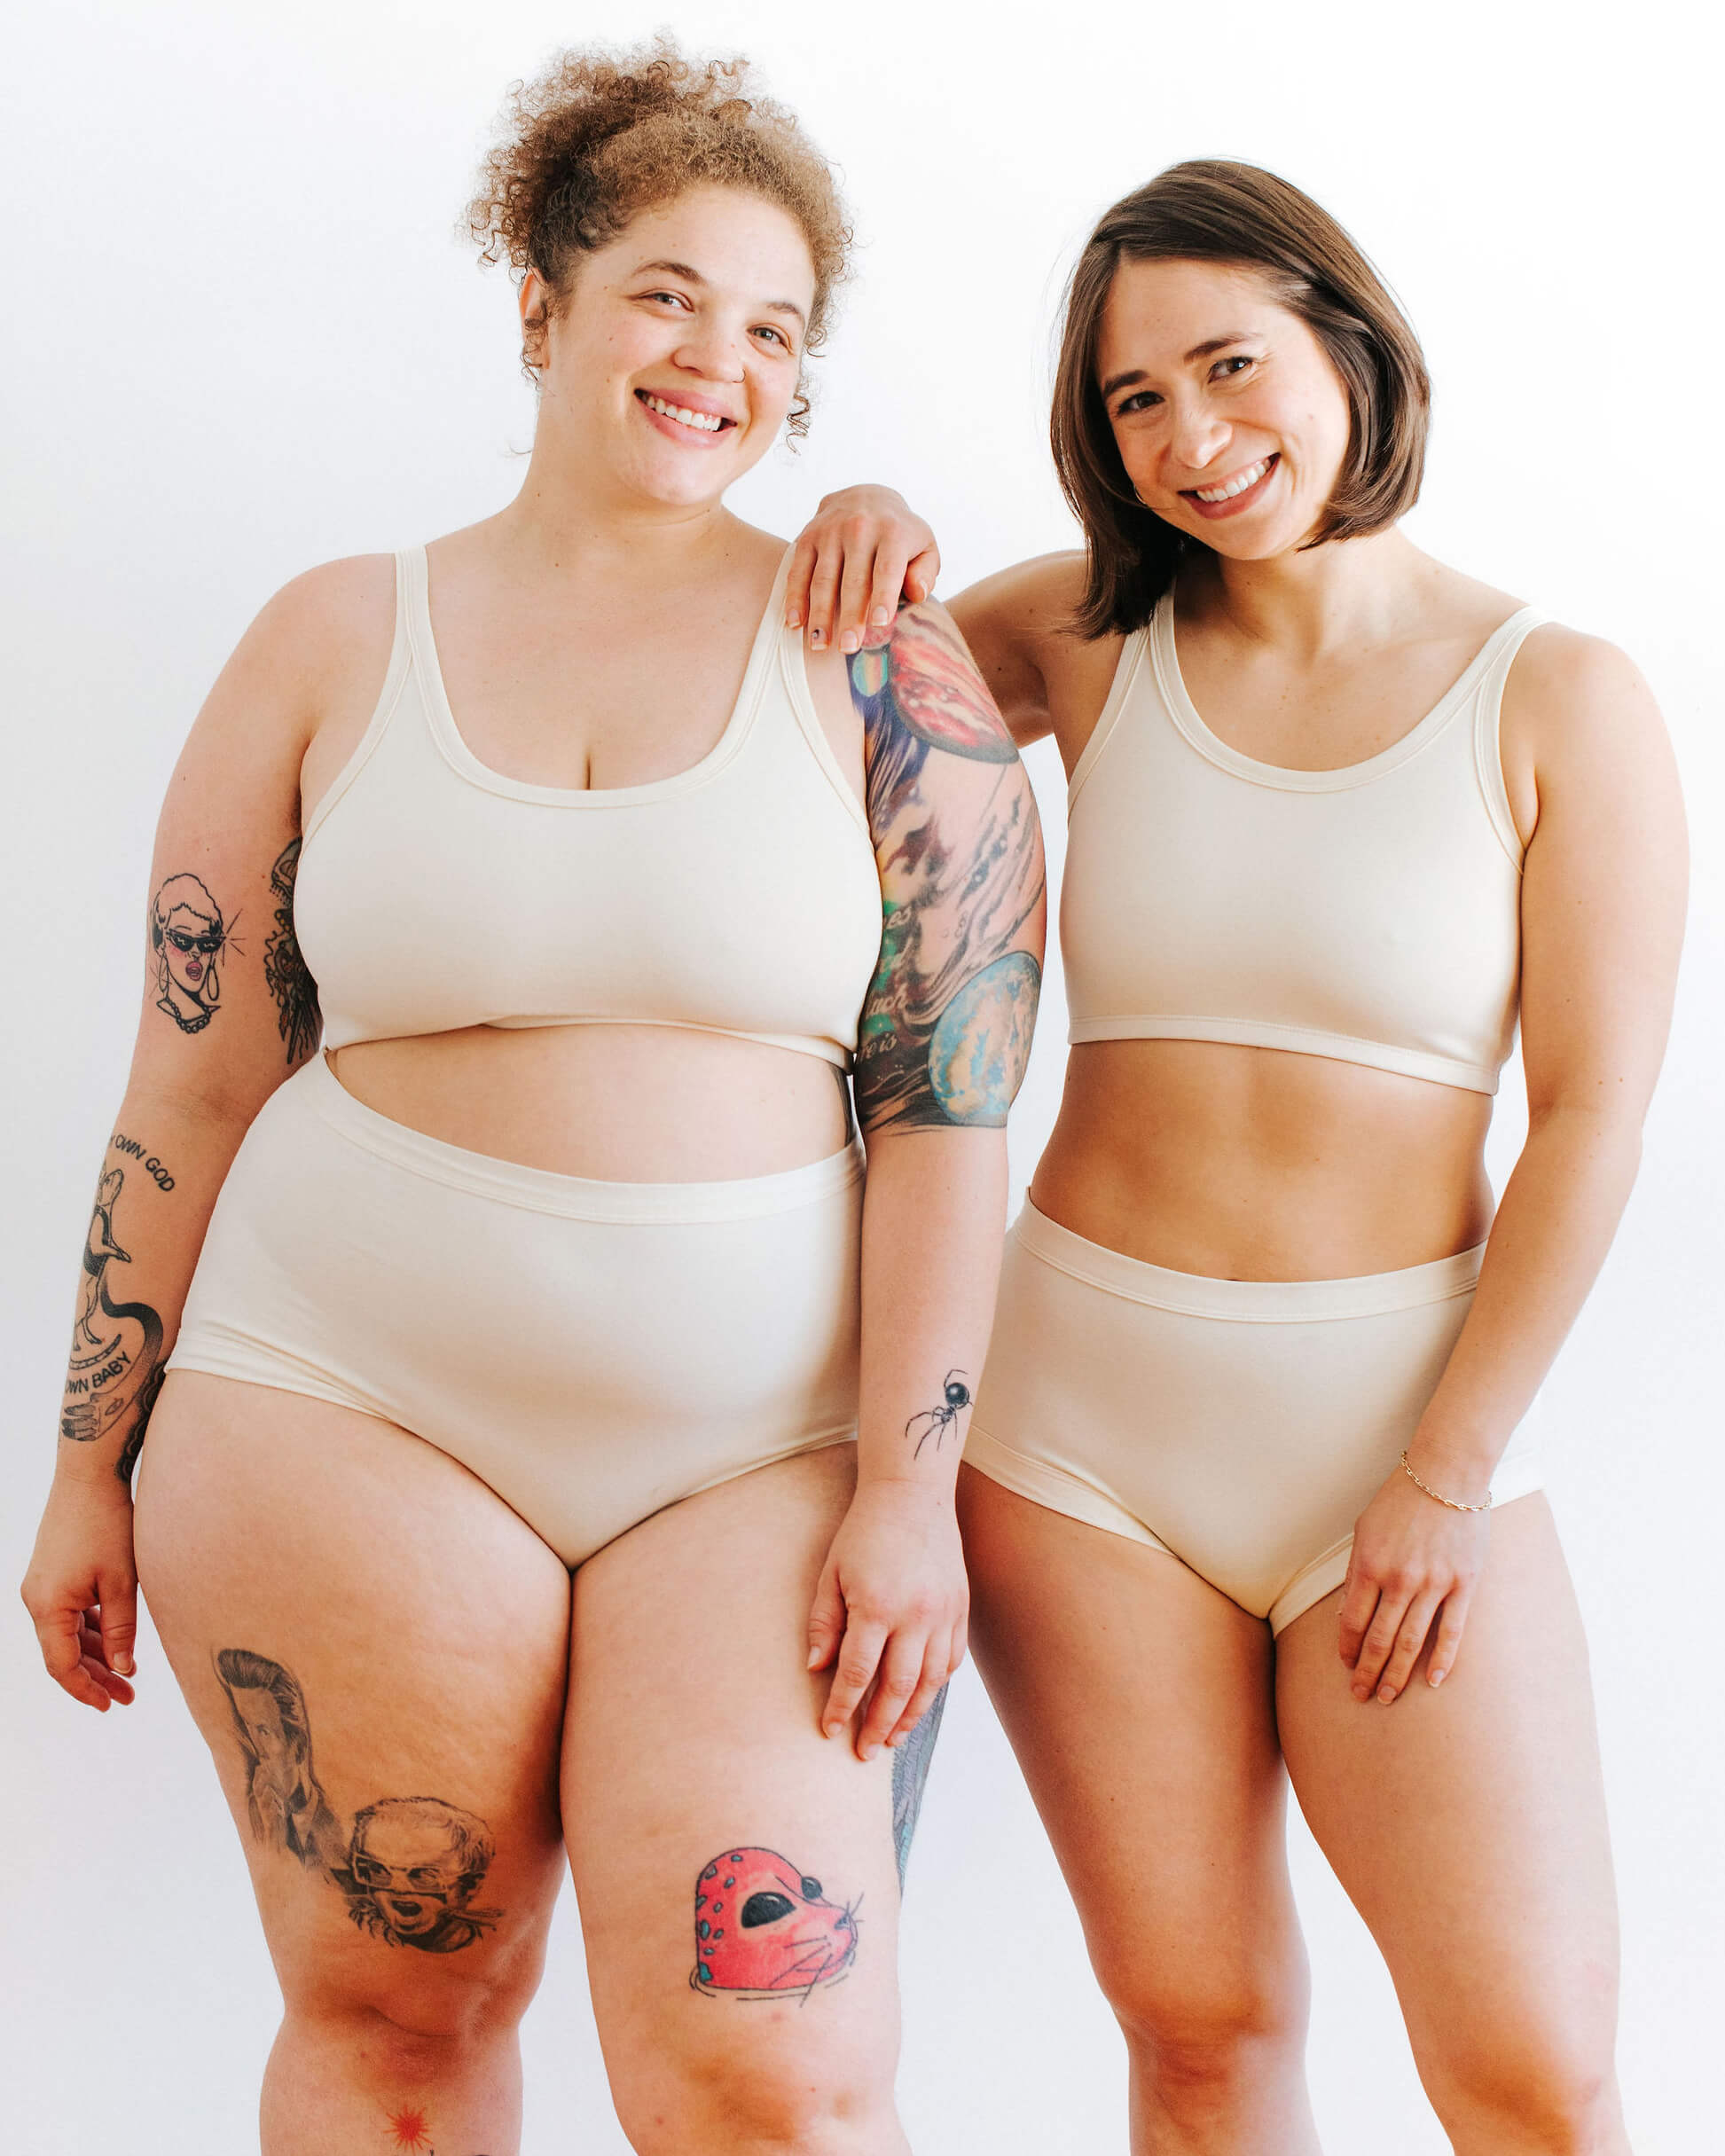 Fit photo from the front of Thunderpants organic cotton Longline Bra and Original style underwear on two models.